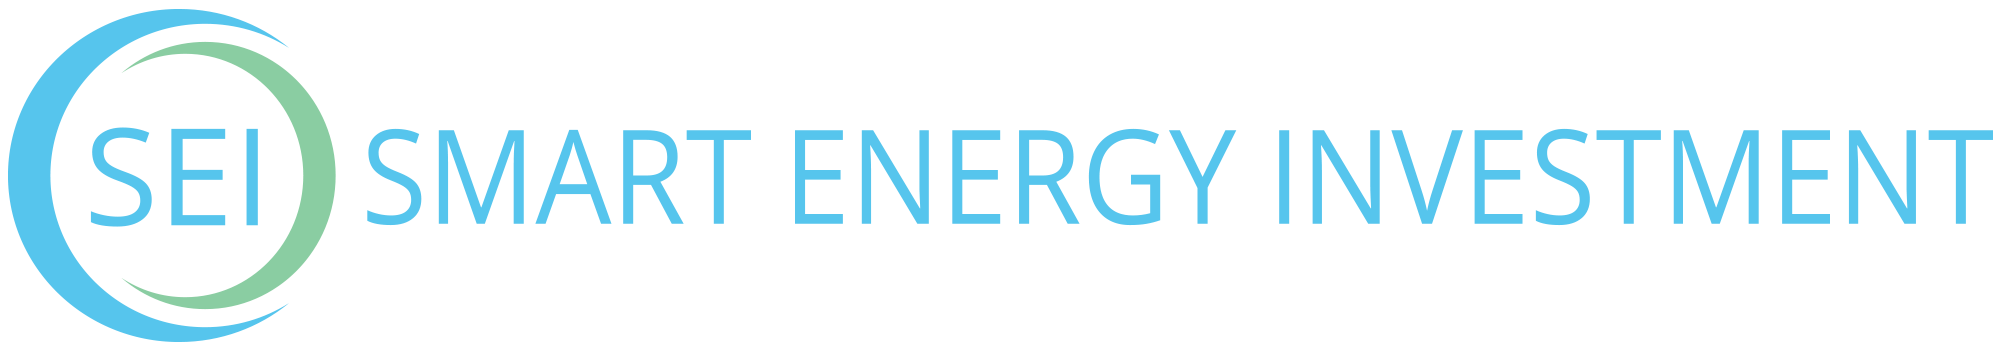 Smart energy investment